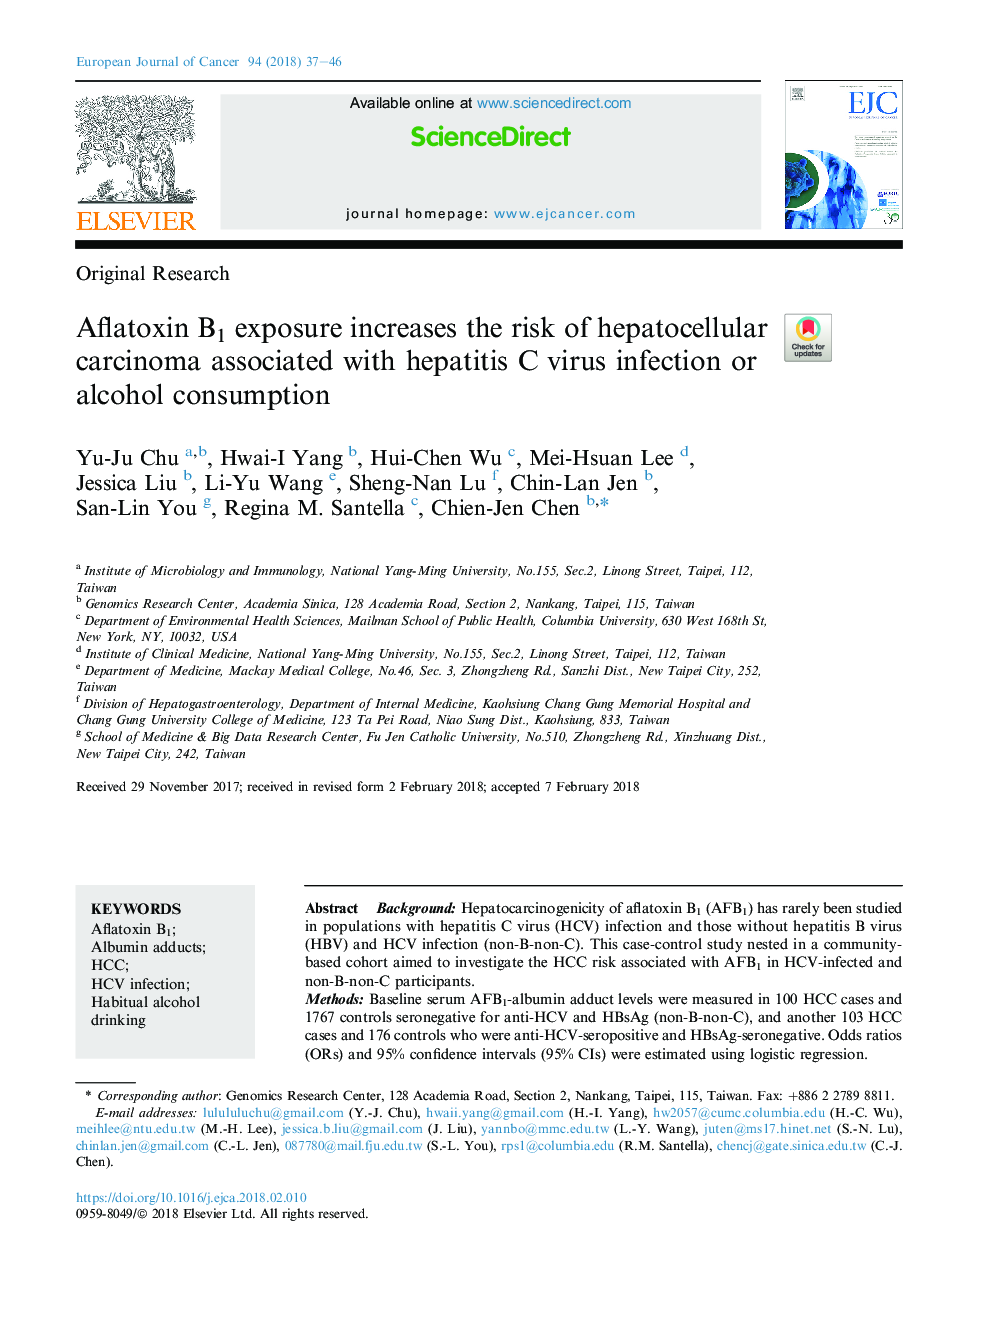 Aflatoxin B1 exposure increases the risk of hepatocellular carcinoma associated with hepatitis C virus infection or alcohol consumption